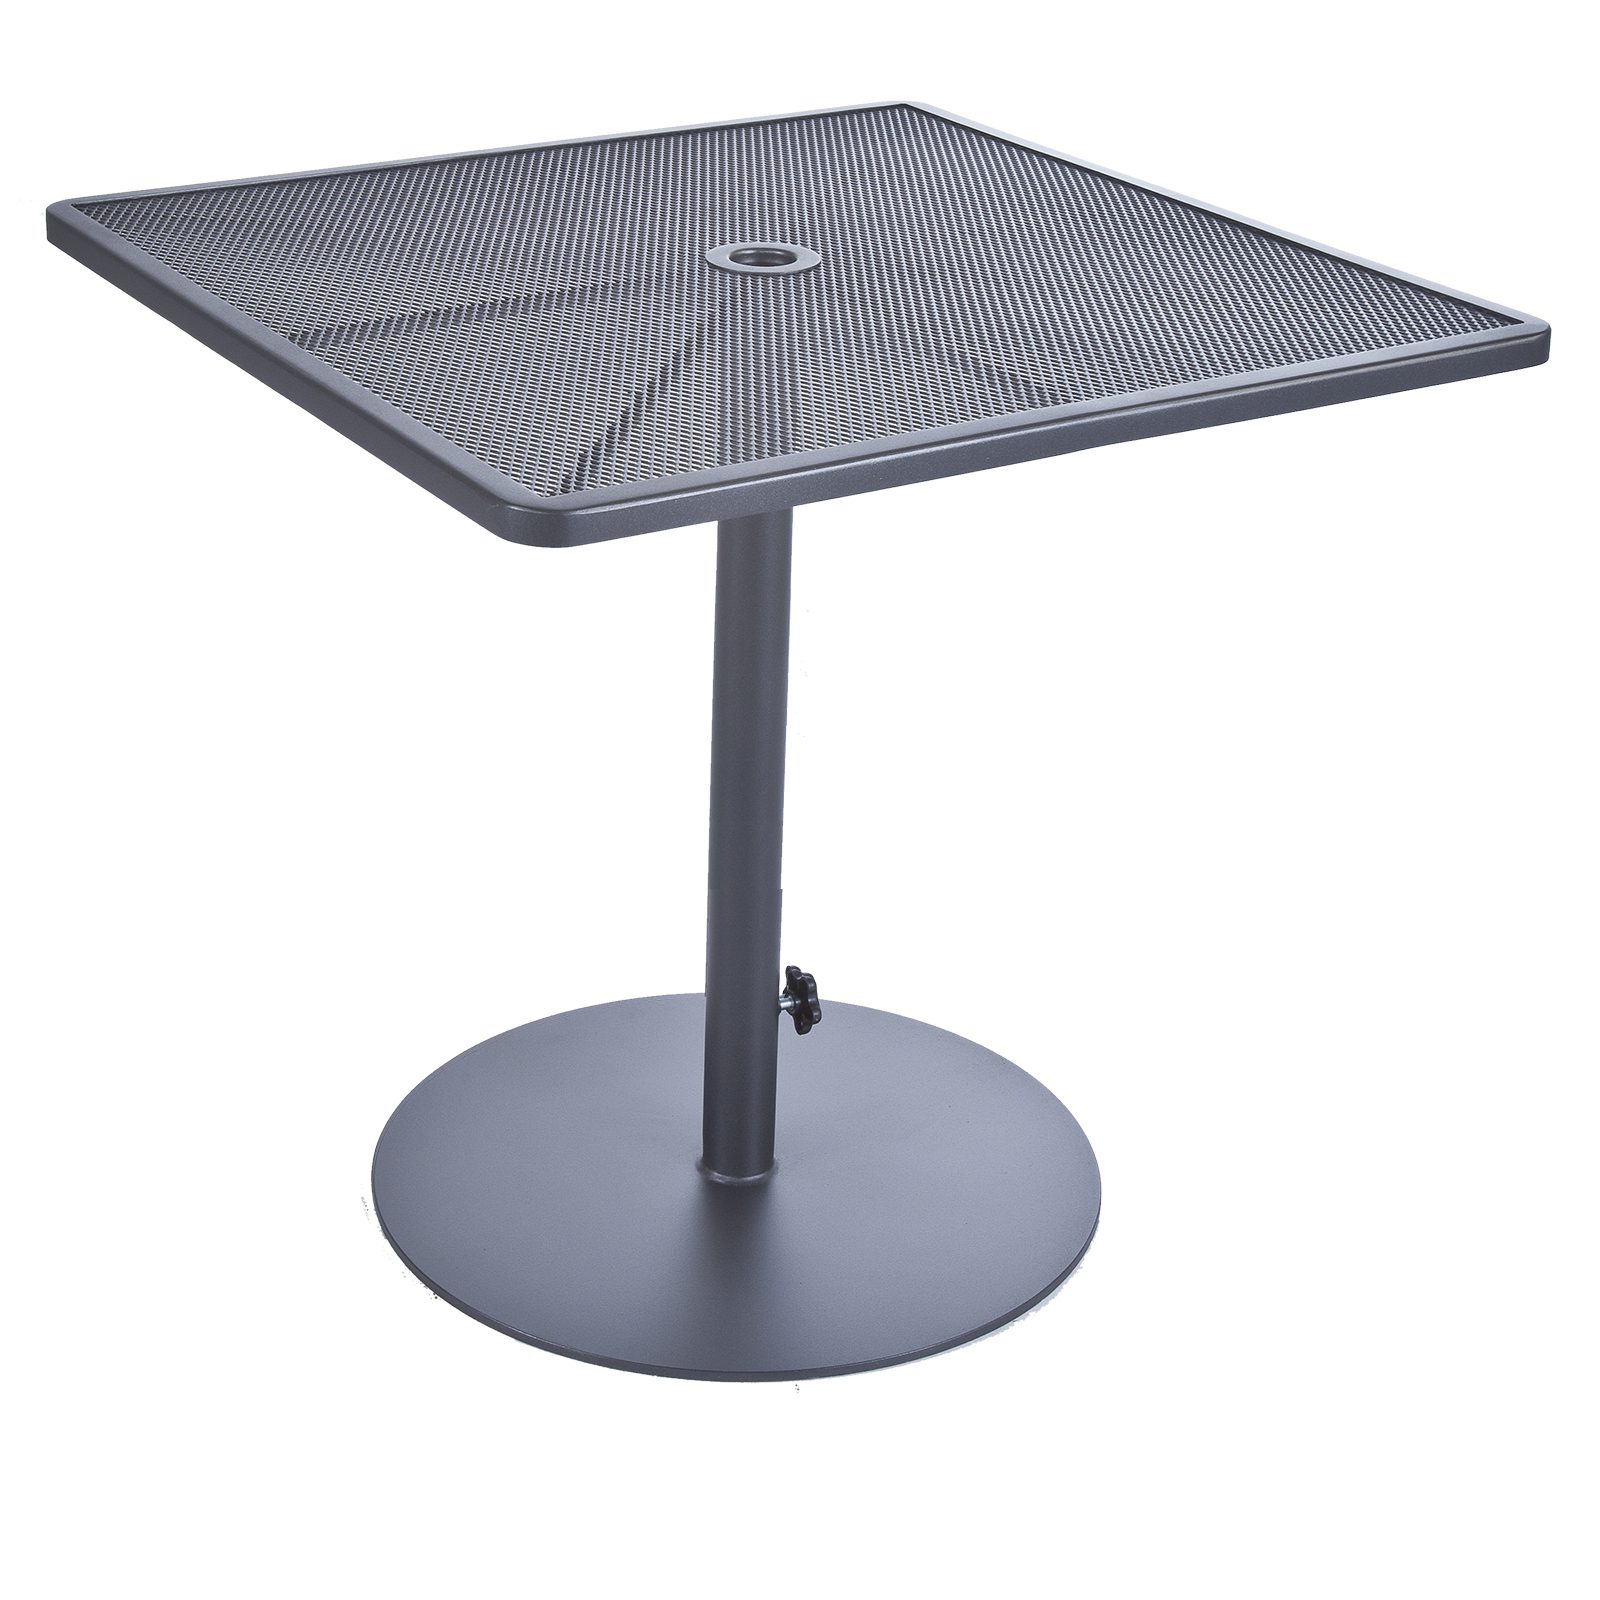 34" Sq. Pedestal Counter Table - Fully Welded Tables - Pedestal Iron Tables 9